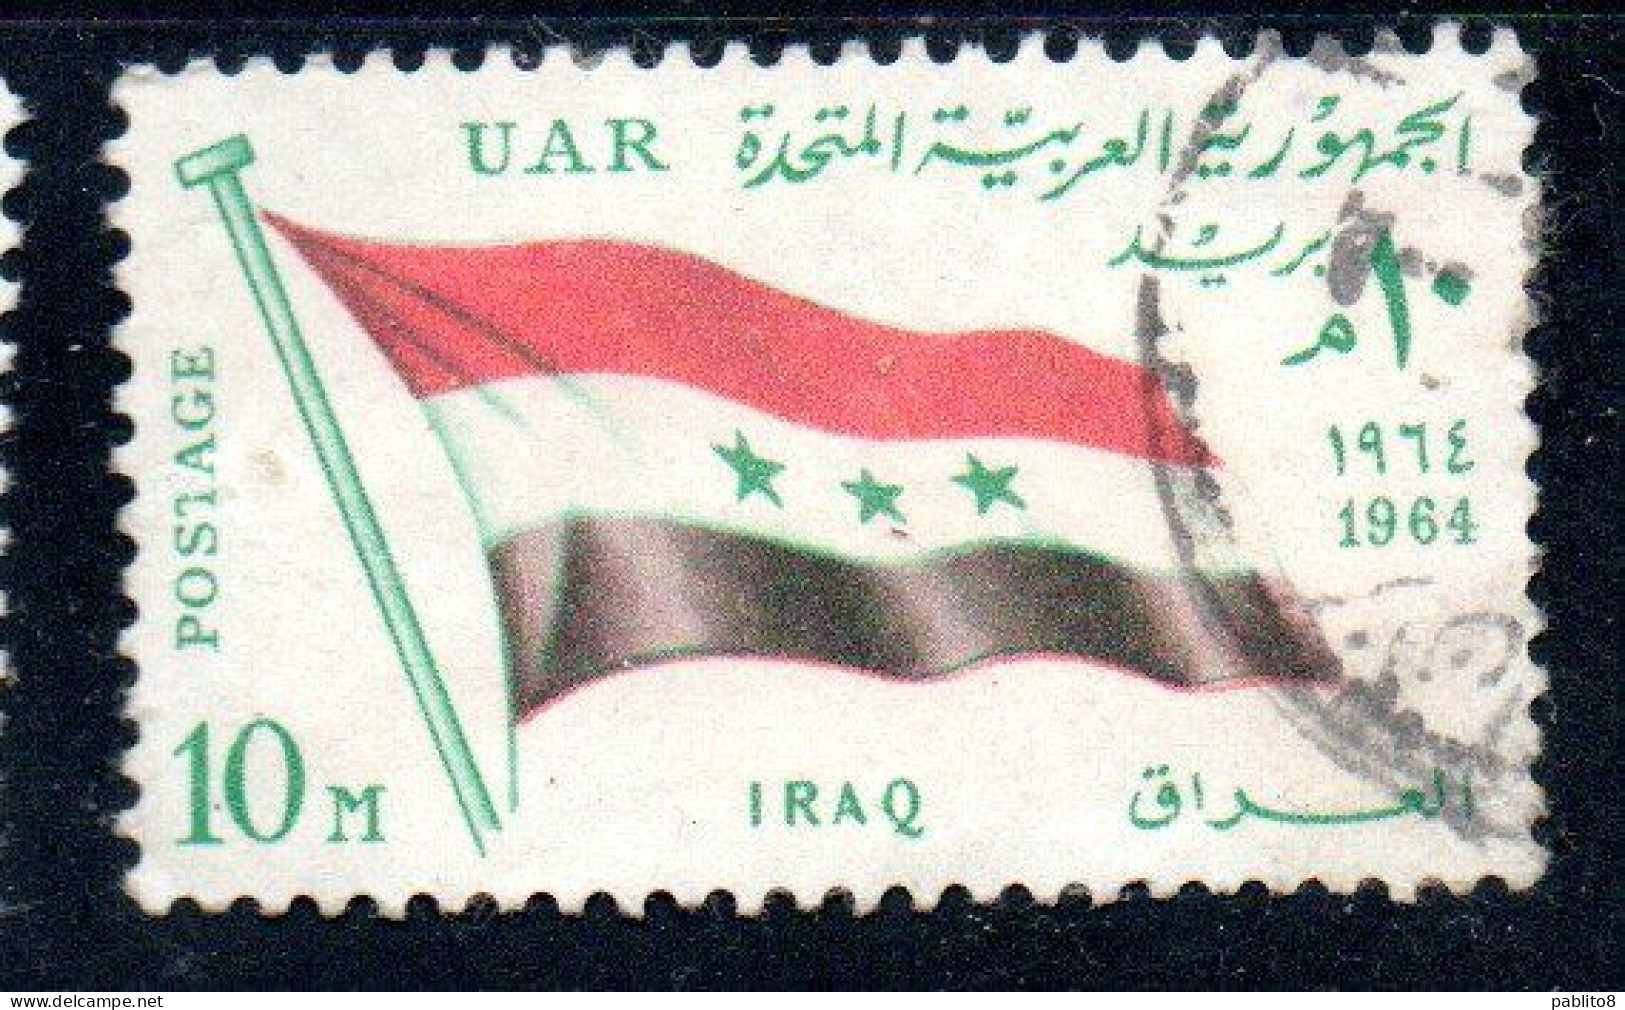 UAR EGYPT EGITTO 1964 SECOND MEETING OF HEADS STATE ARAB LEAGUE FLAG OF IRAQ 10m USED USATO OBLITERE' - Gebraucht